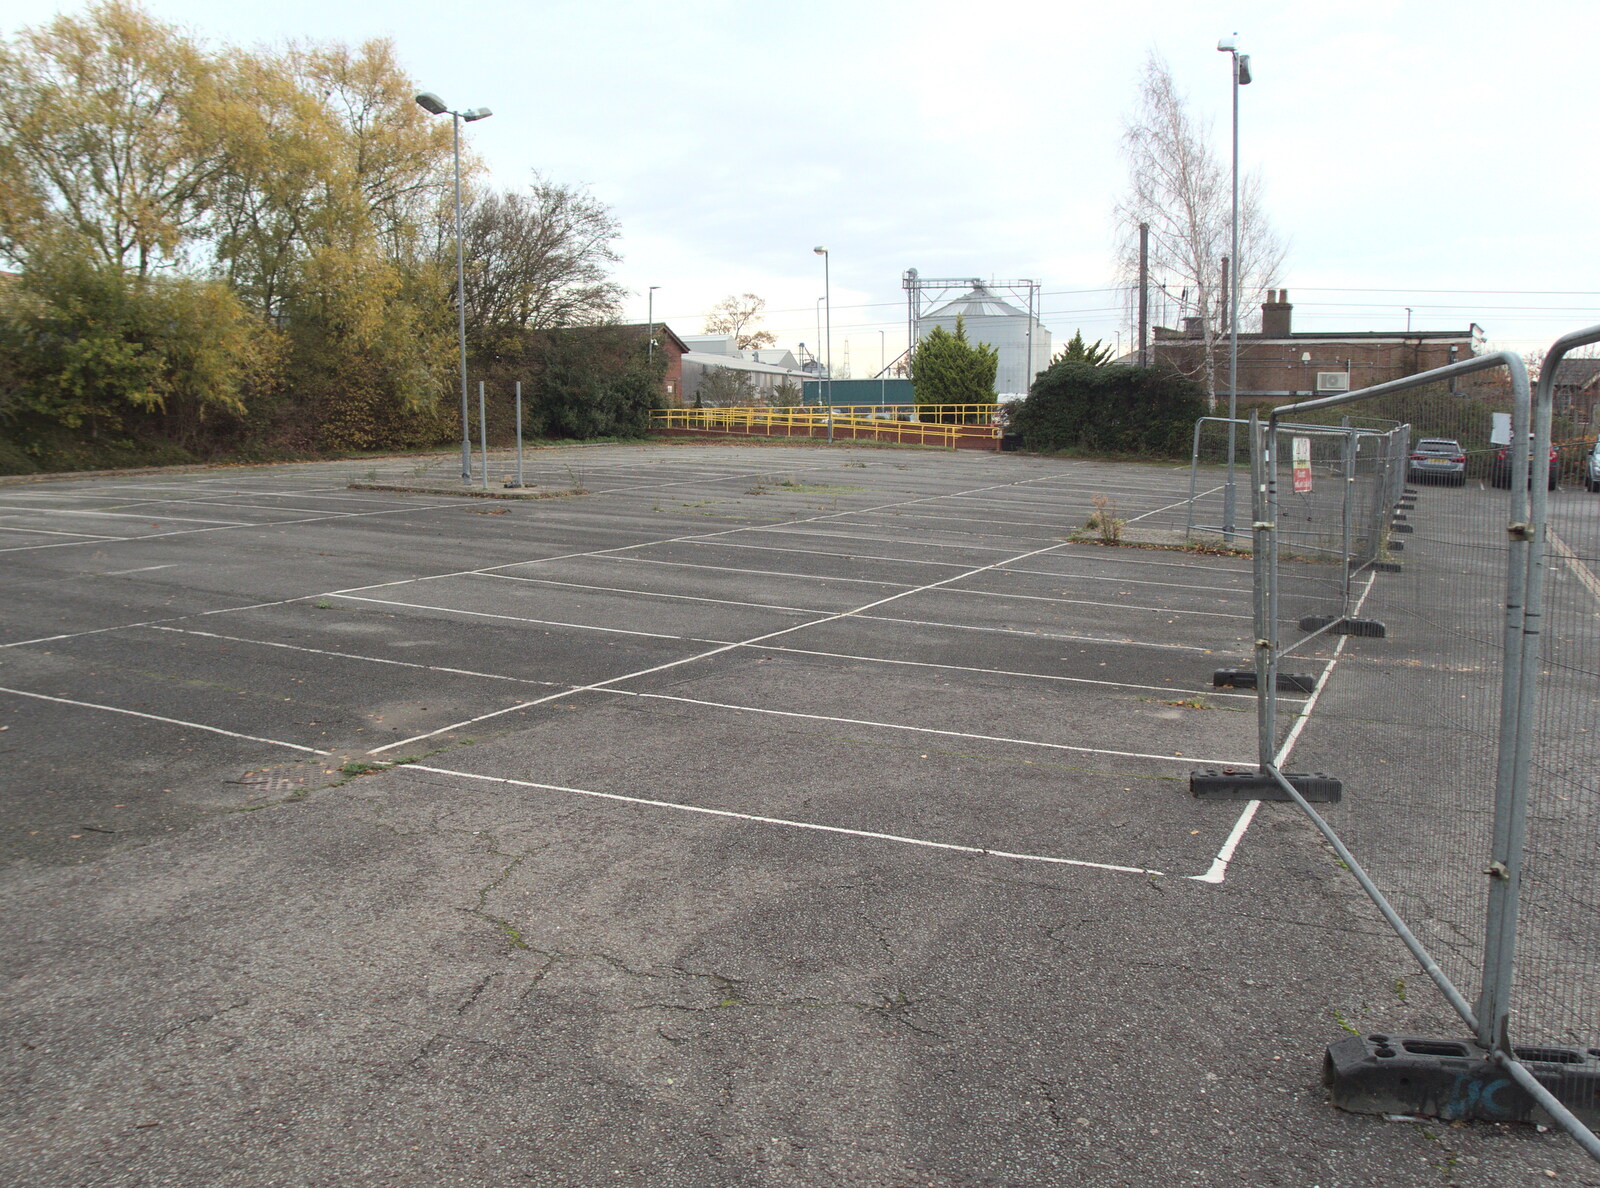 The car park has been mysteriously halved from Lunch in Norwich and the GSB at Gislingham, Suffolk - 26th November 2022